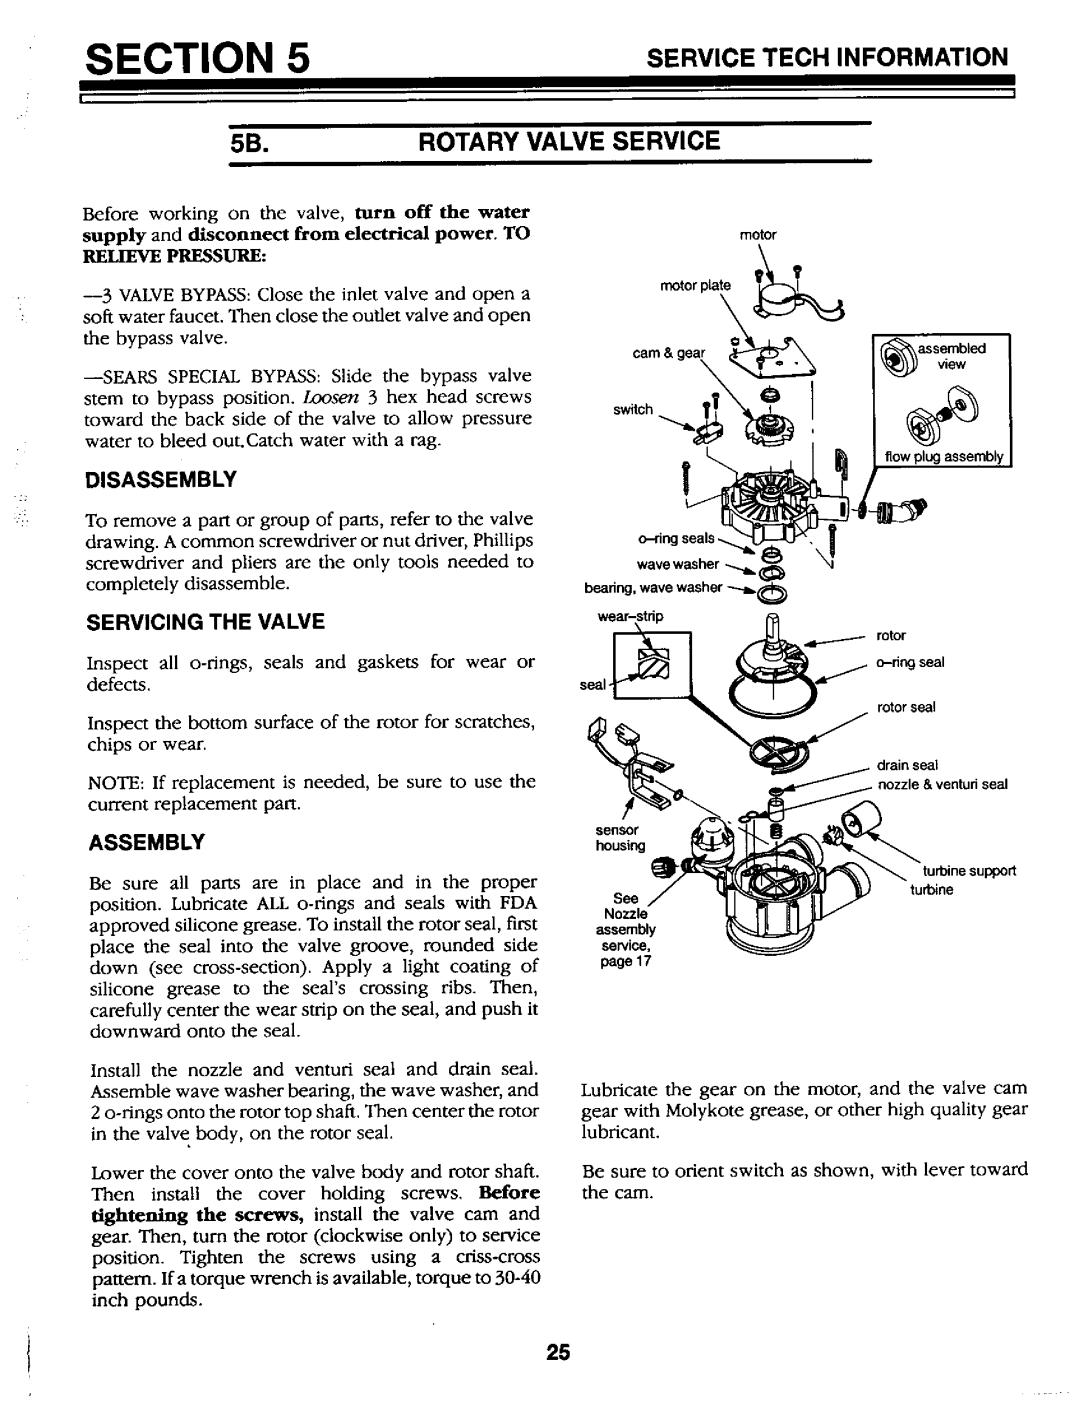 Kenmore 625.34867 owner manual 5B.ROTARY VALVE SERVICE, Section, Service Tech Information 